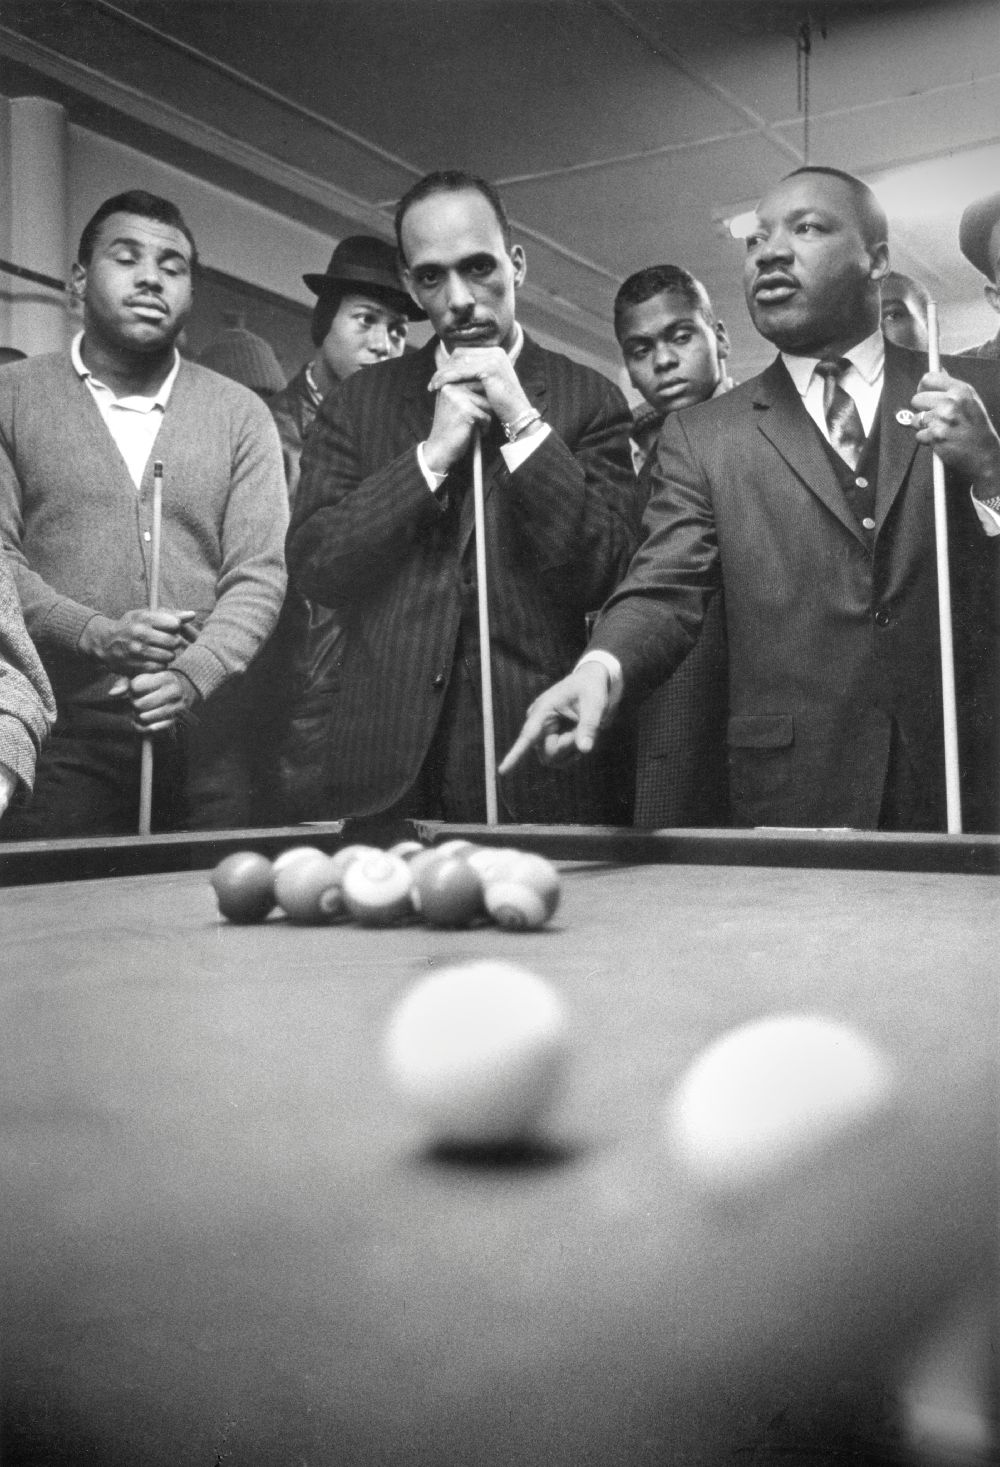 Martin Luther King Day & Billiards